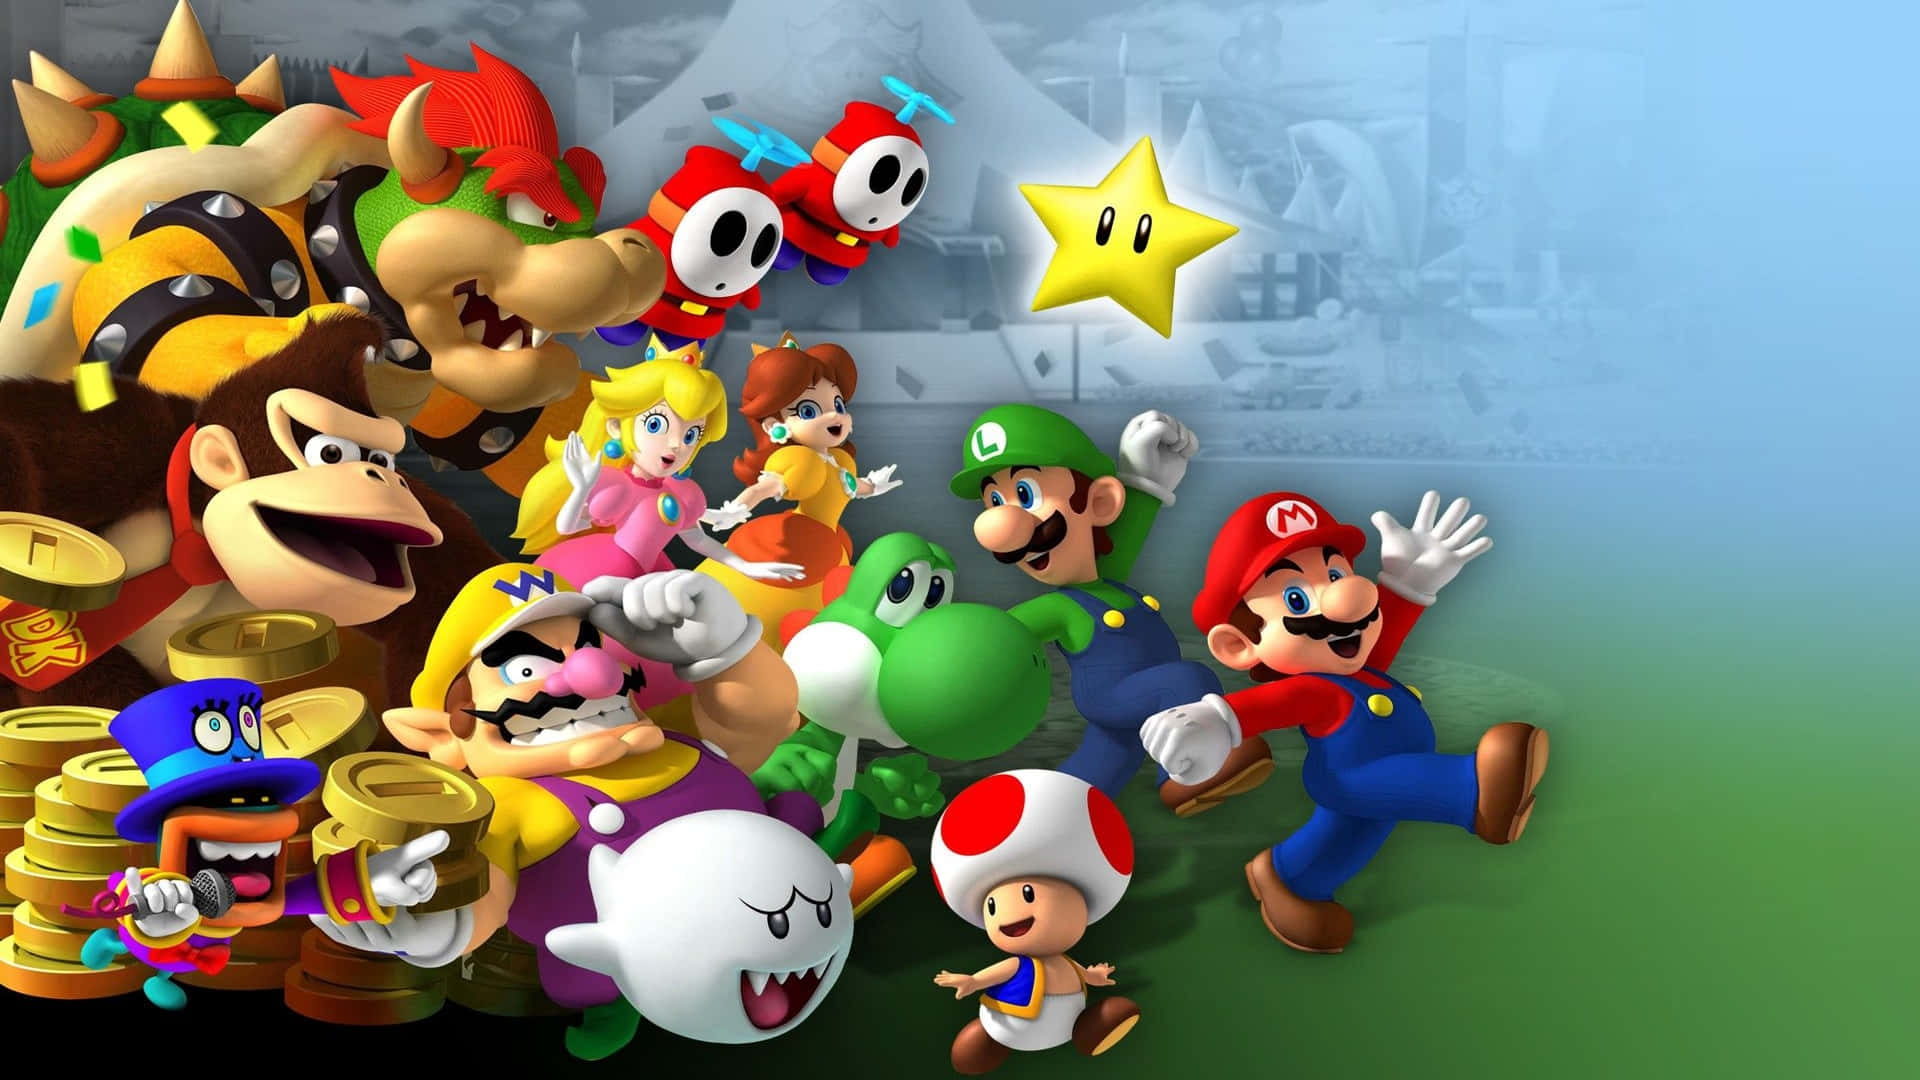 Immerse yourself in the world of your favorite video games with this Zoom background